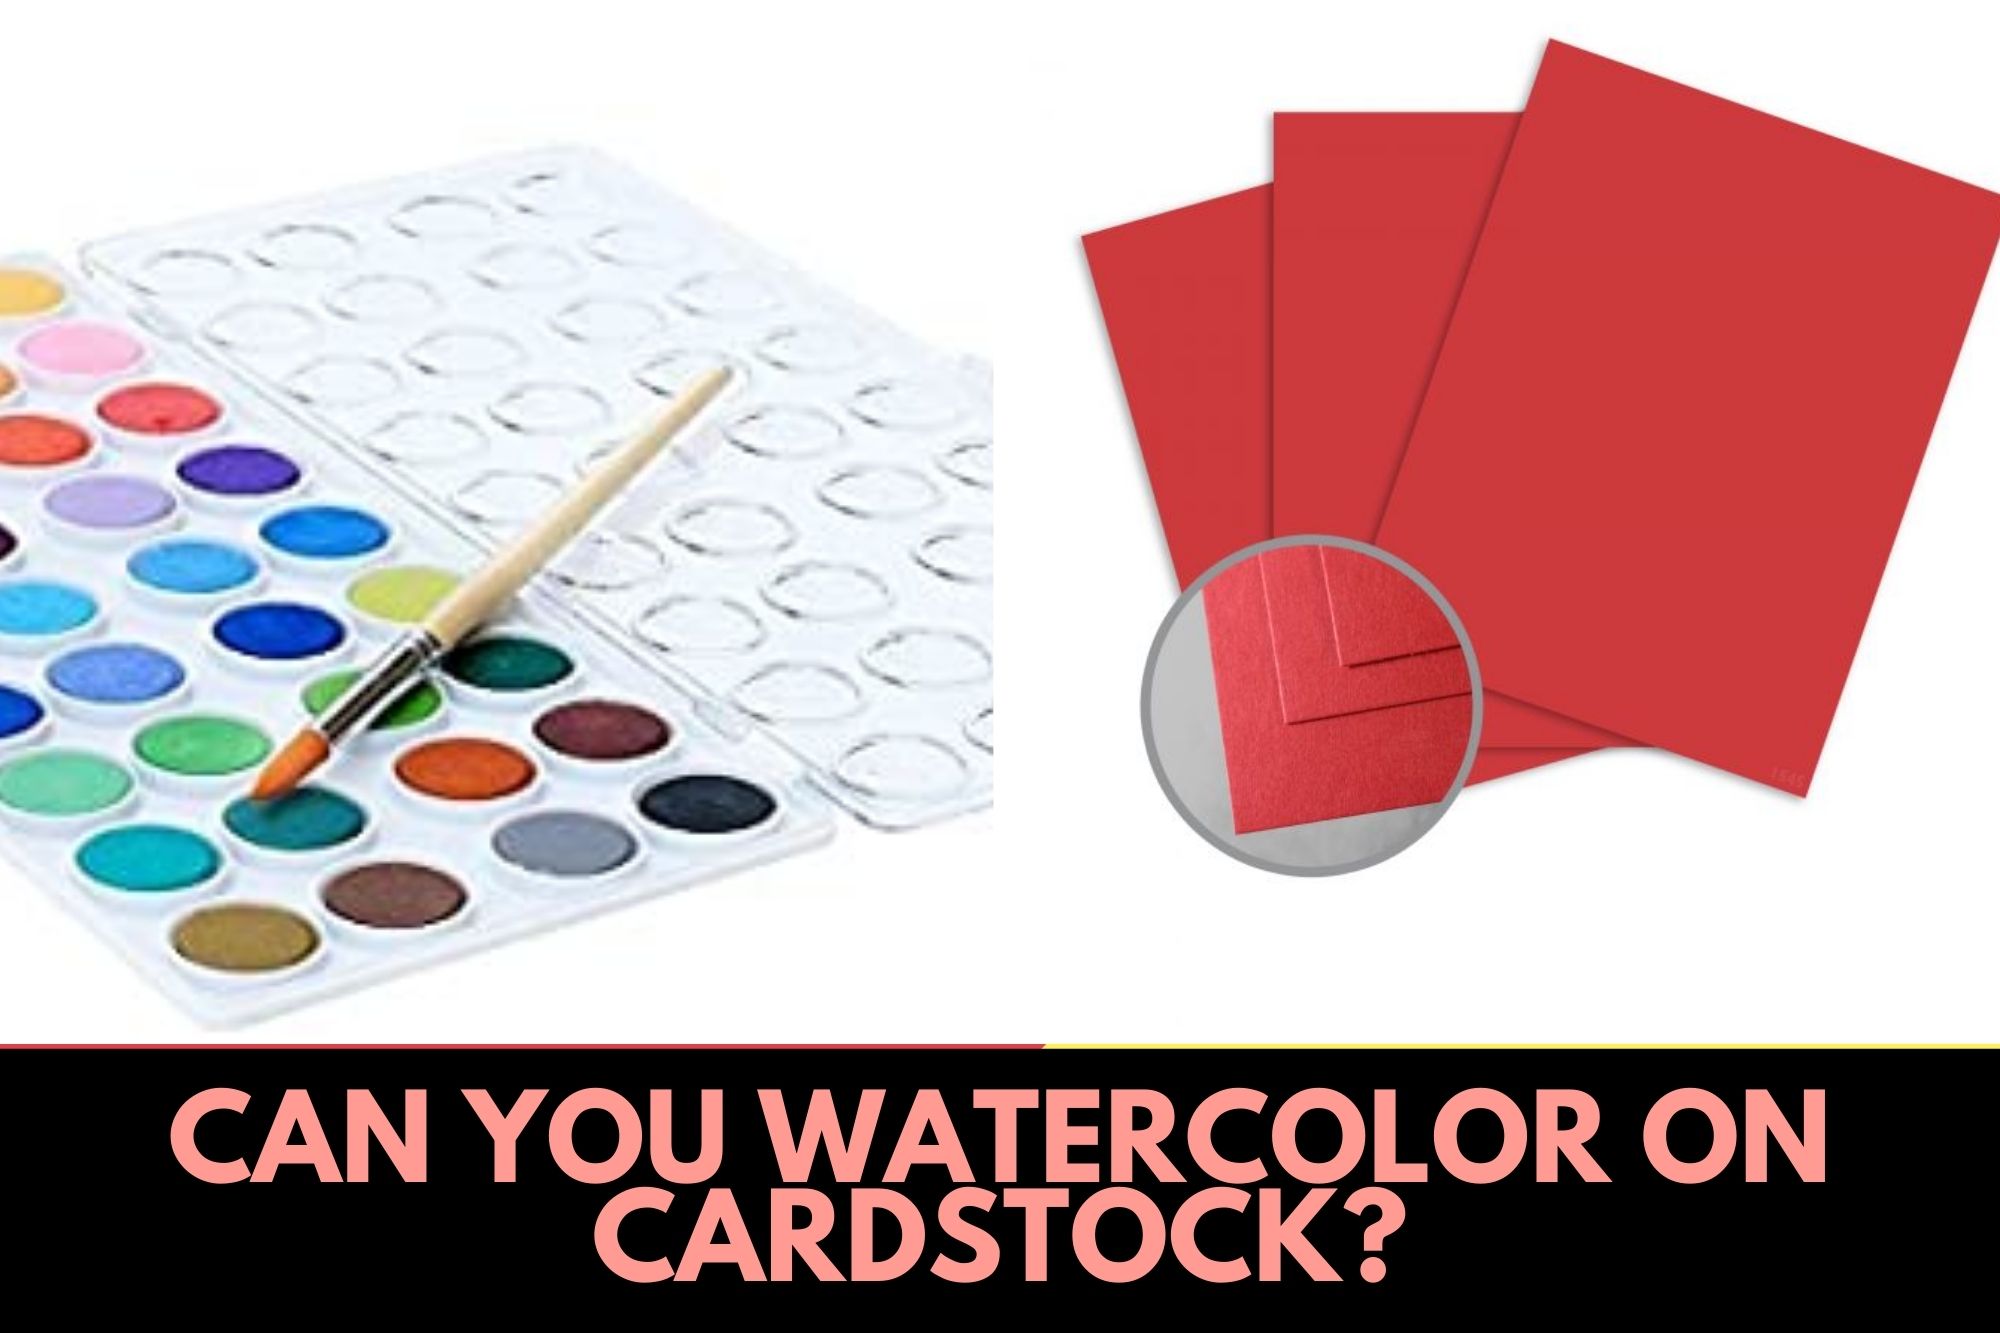 Can You Watercolor On Cardstock?